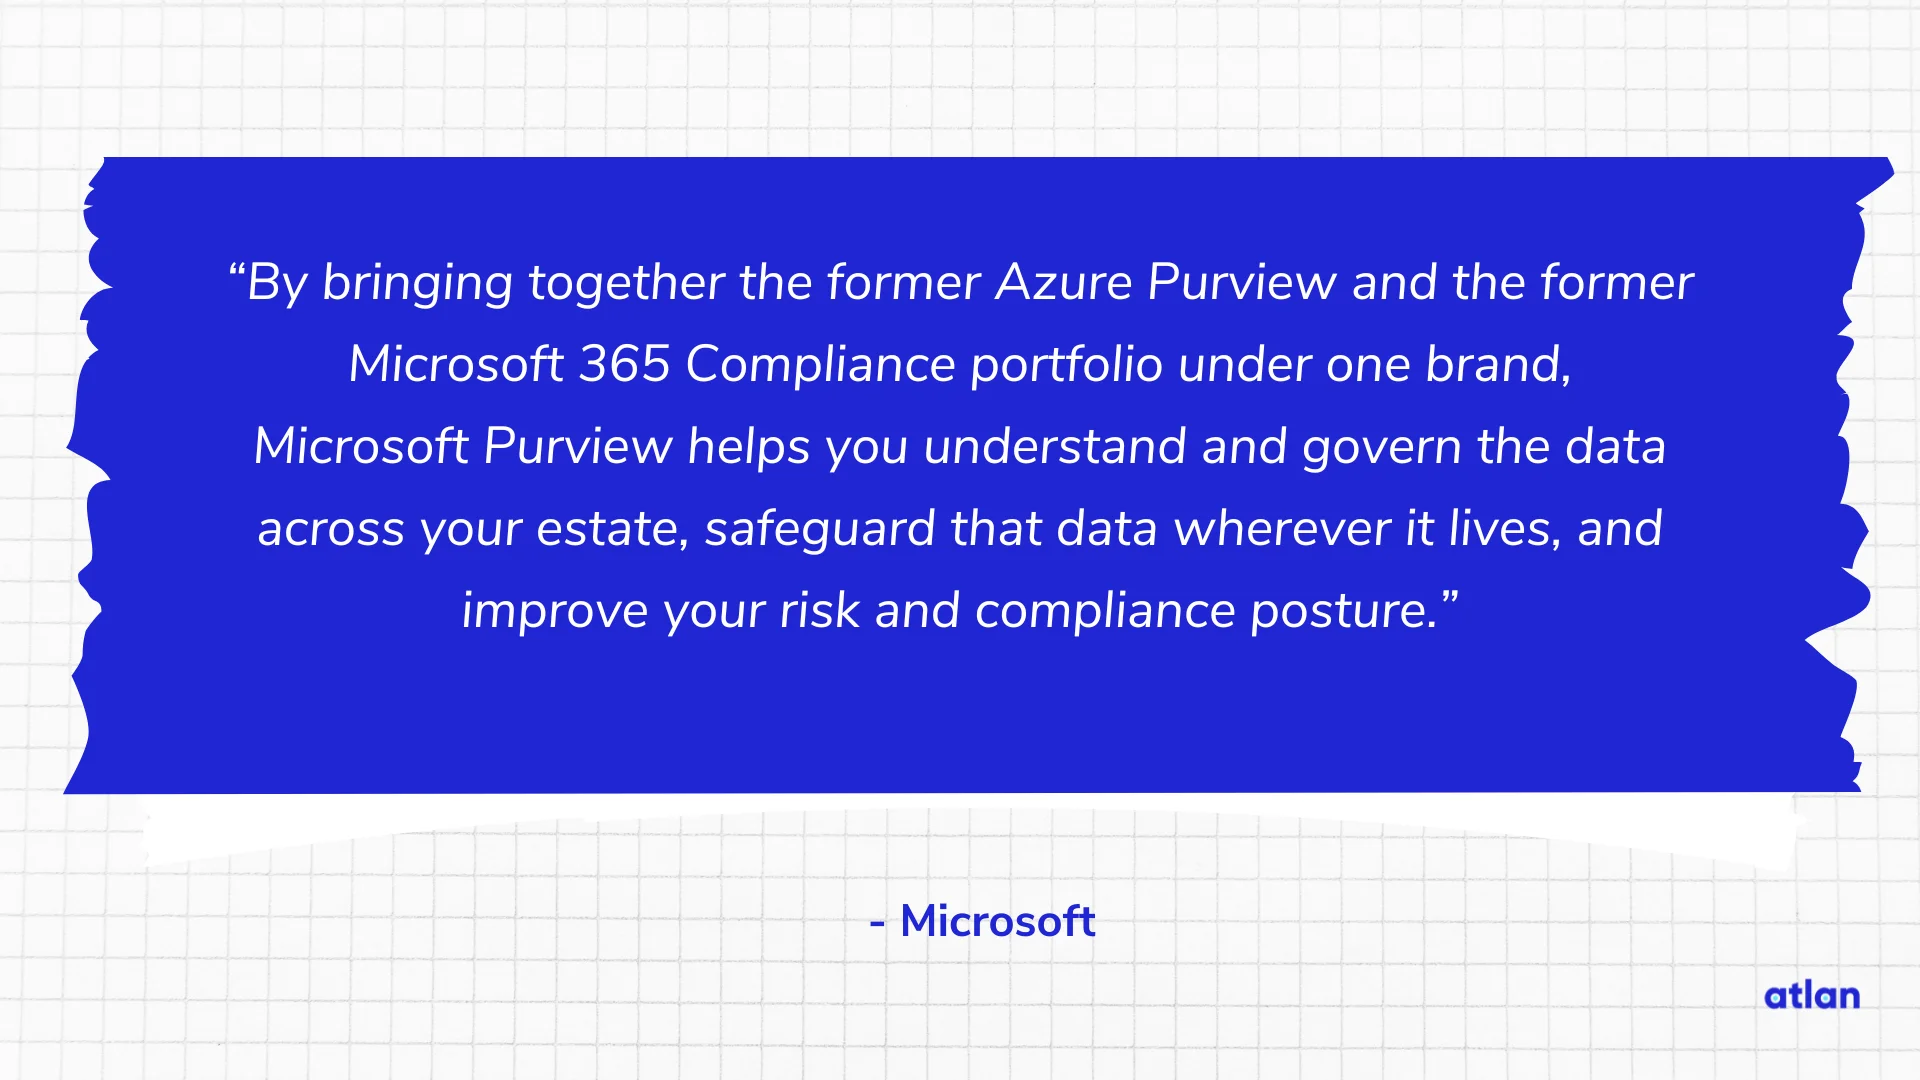 Microsoft Purview helps you understand and govern the data across your estate